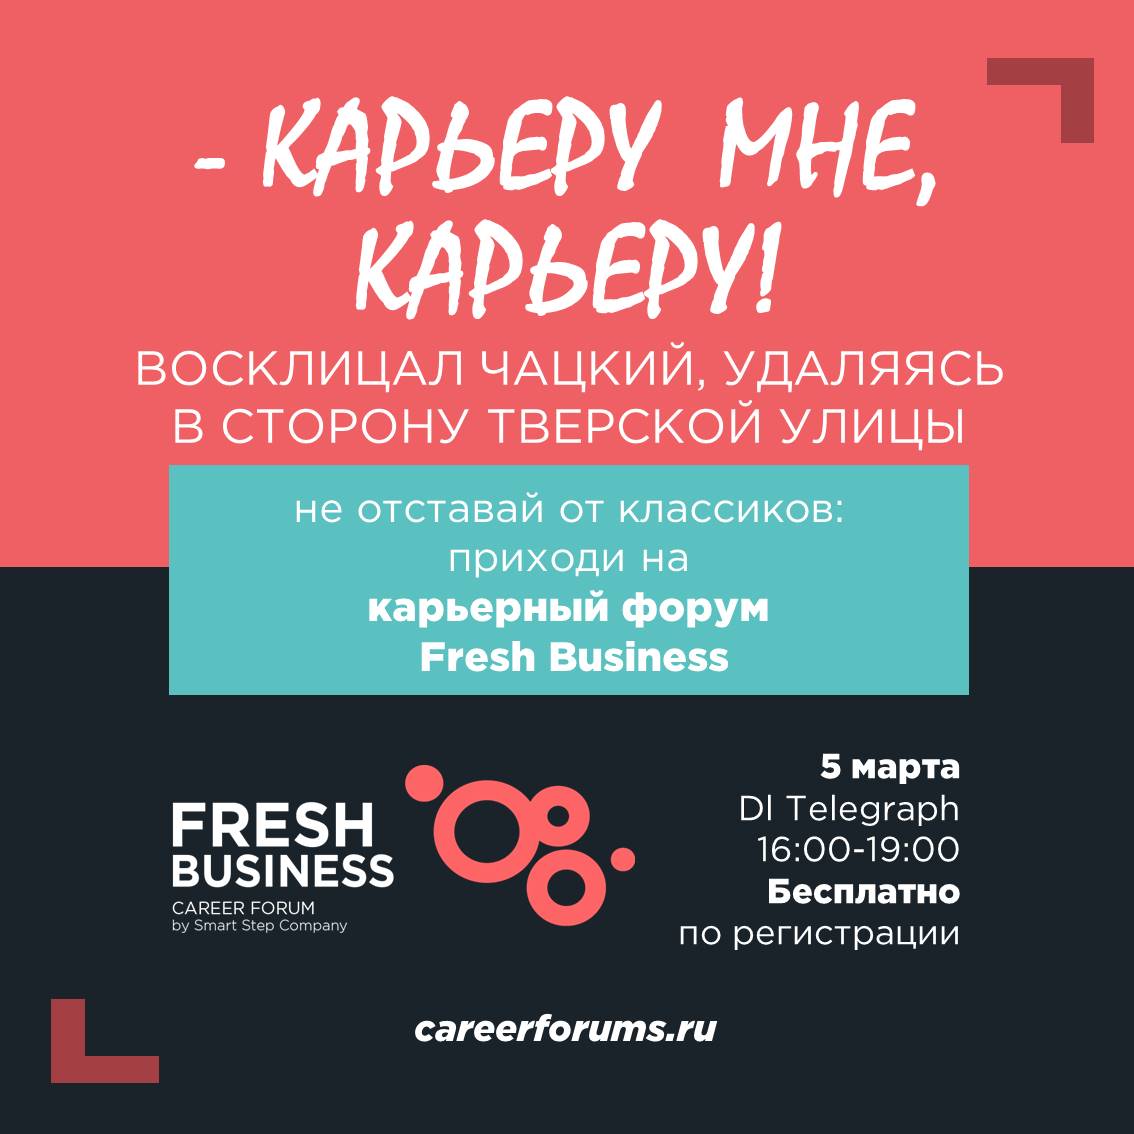 Career forum Moscow